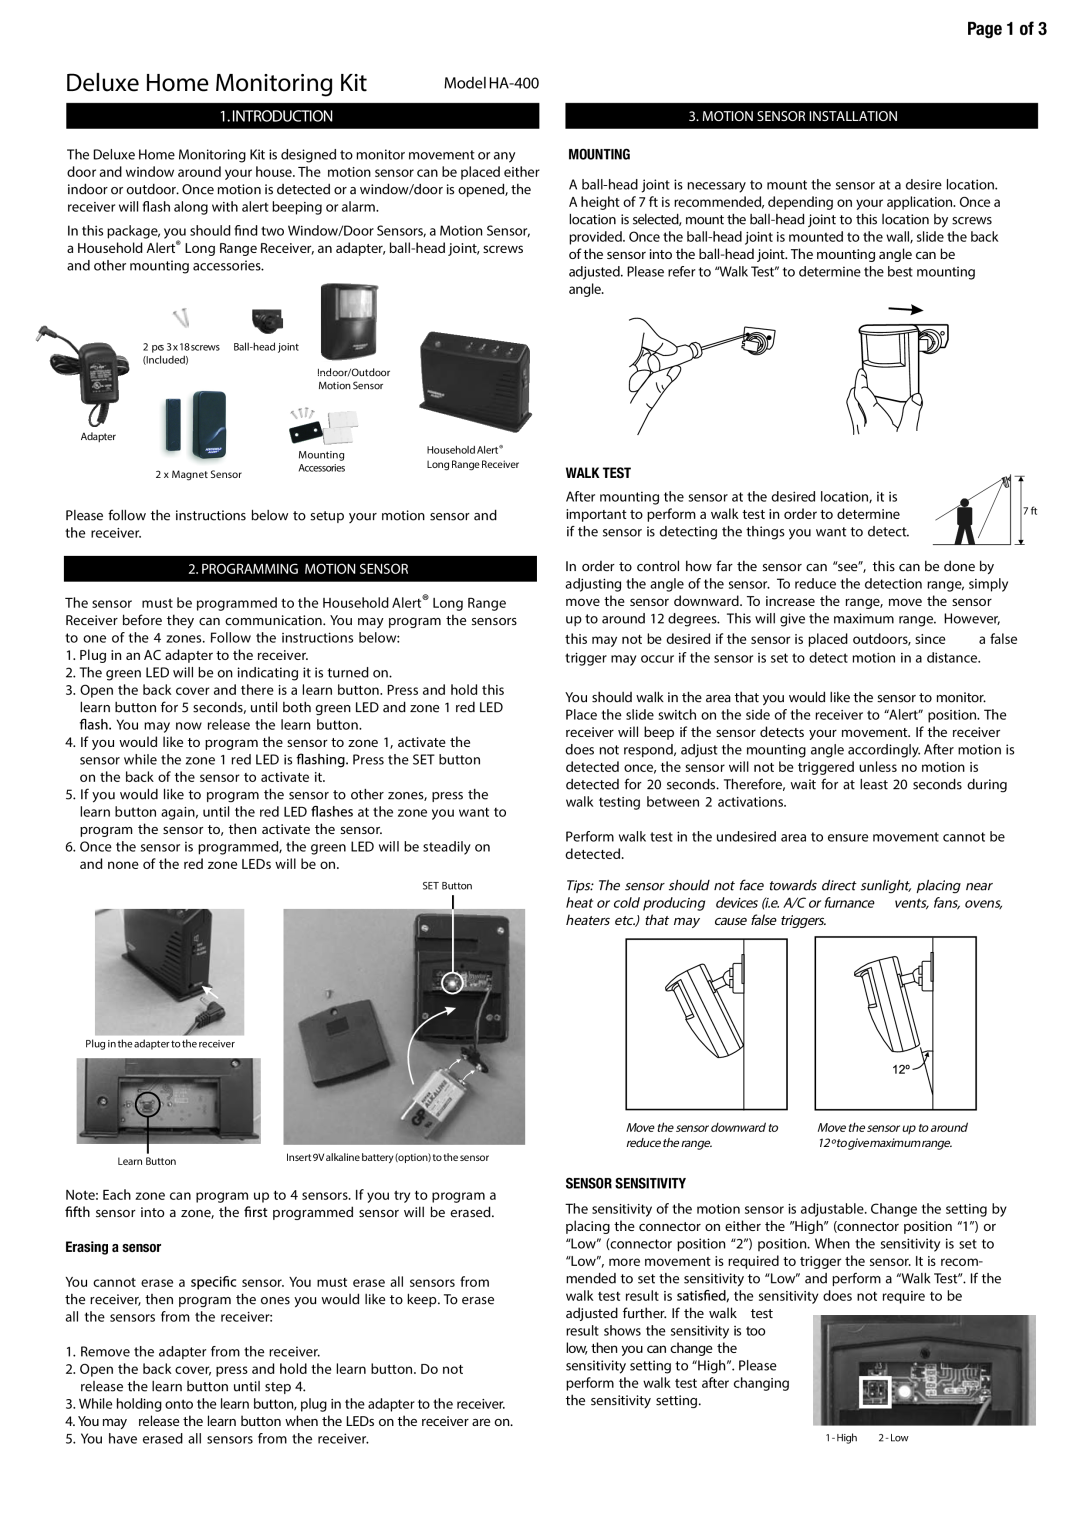 SkyLink HA-400 manual Page 1 of, Programming Motion Sensor, Erasing a sensor, Motion Sensor Installation, Mounting 